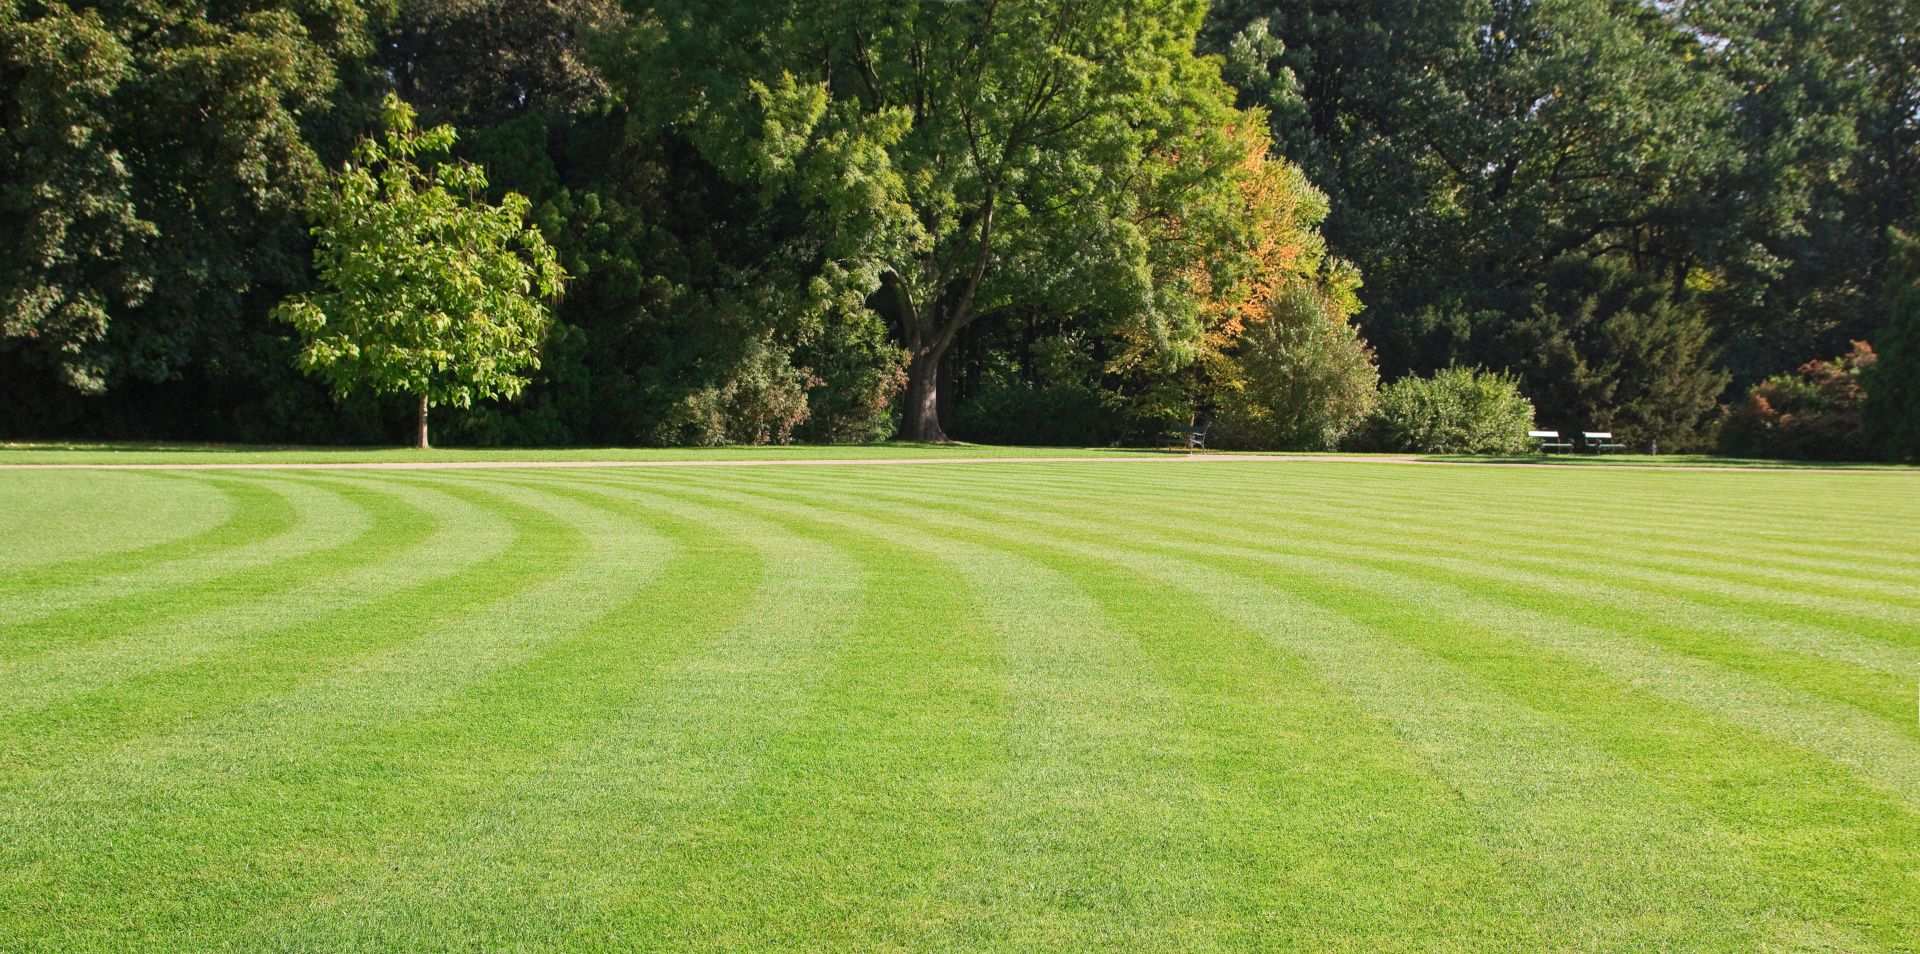 green, striped lawn in the park